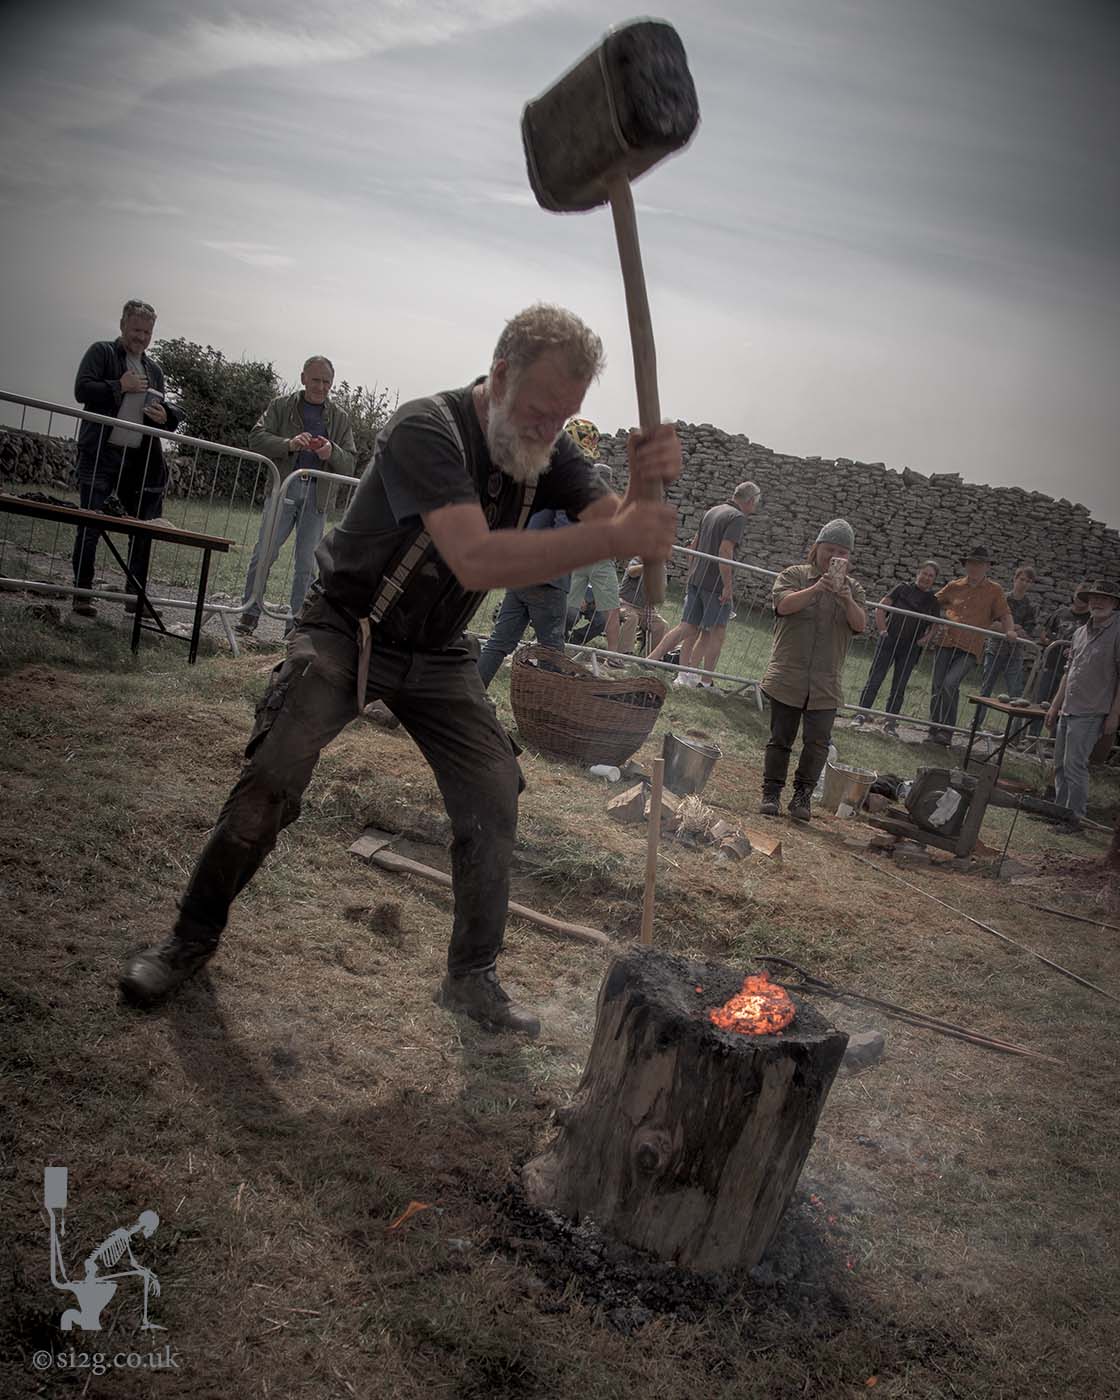 Iron Smelting Festival 02 - Giving the iron bloom a good wallop.